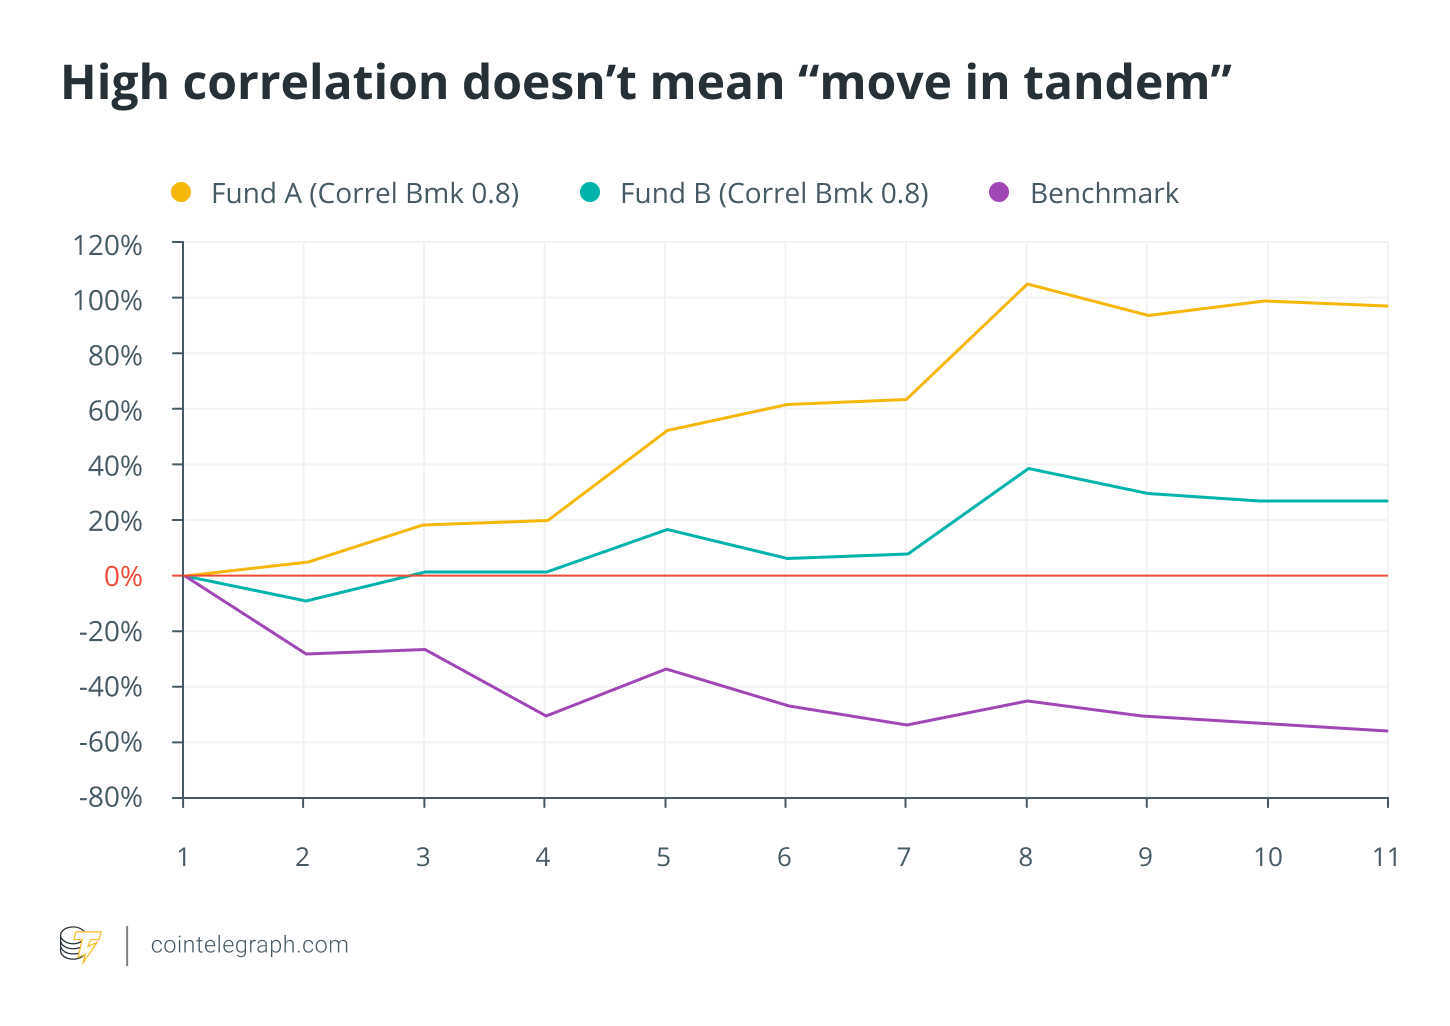 High correlation does’t mean move in tandem